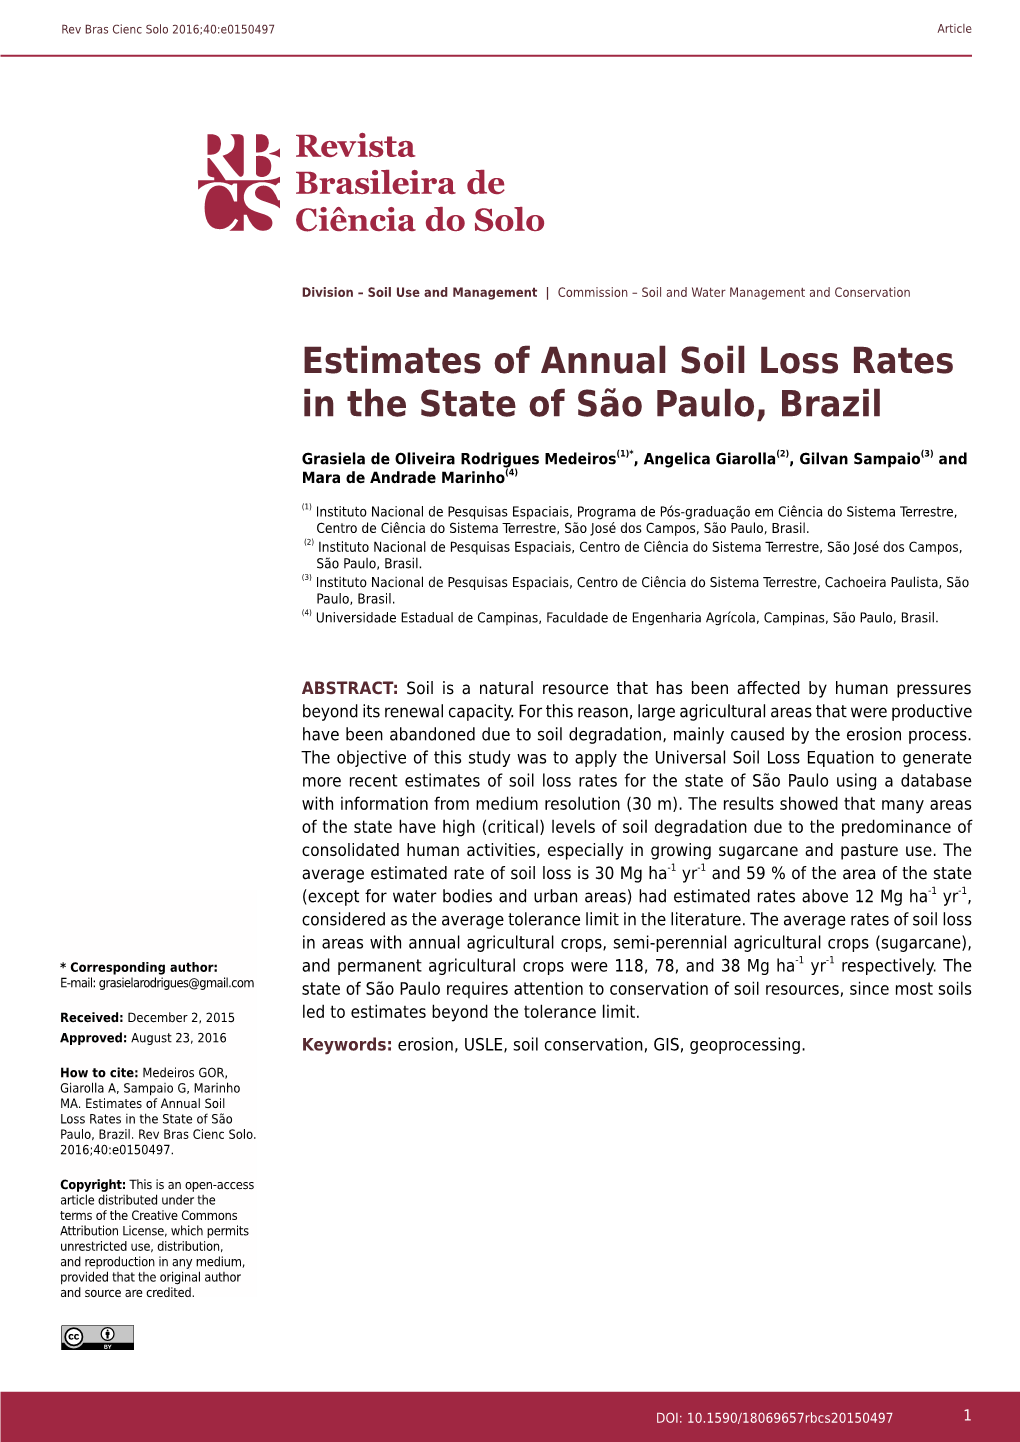 Estimates of Annual Soil Loss Rates in the State of São Paulo, Brazil